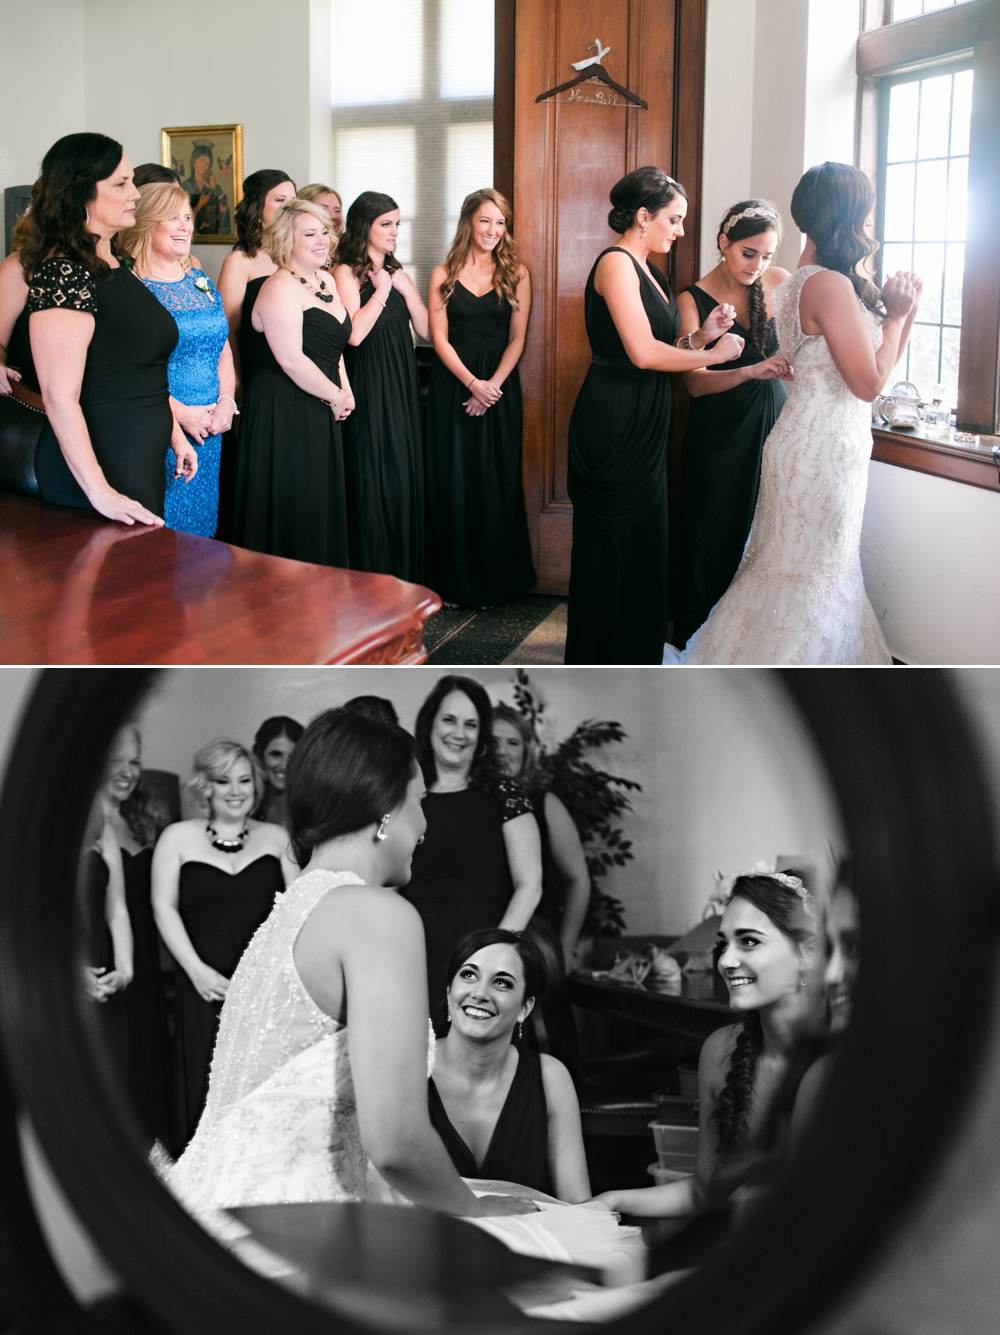 Tips for great getting ready wedding pics by Kansas City Wedding photographer Darbi G